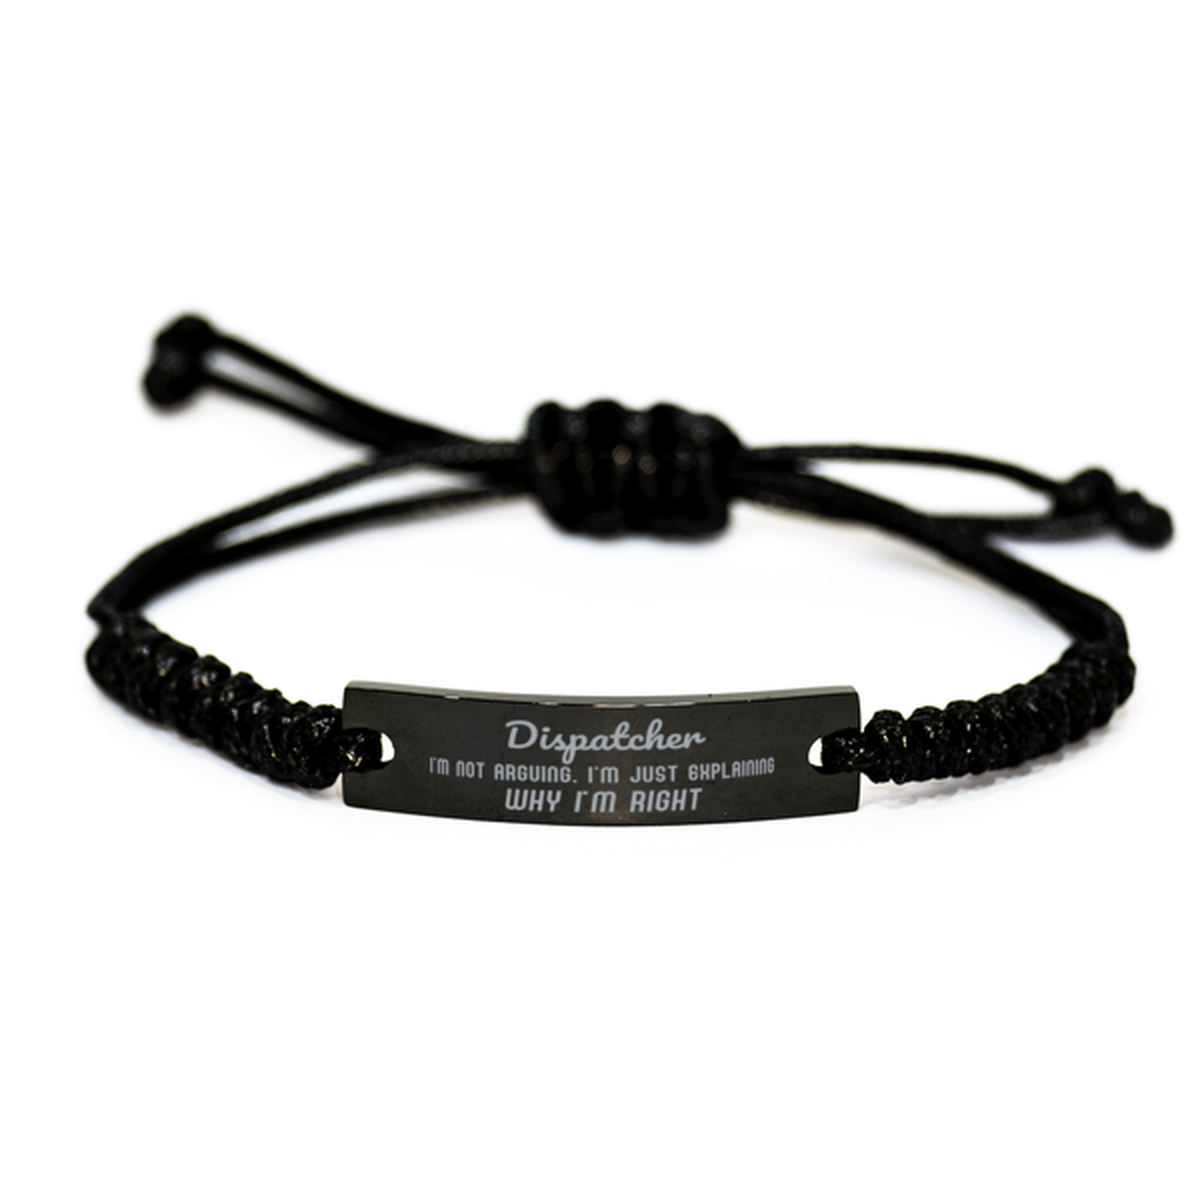 Dispatcher I'm not Arguing. I'm Just Explaining Why I'm RIGHT Black Rope Bracelet, Funny Saying Quote Dispatcher Gifts For Dispatcher Graduation Birthday Christmas Gifts for Men Women Coworker